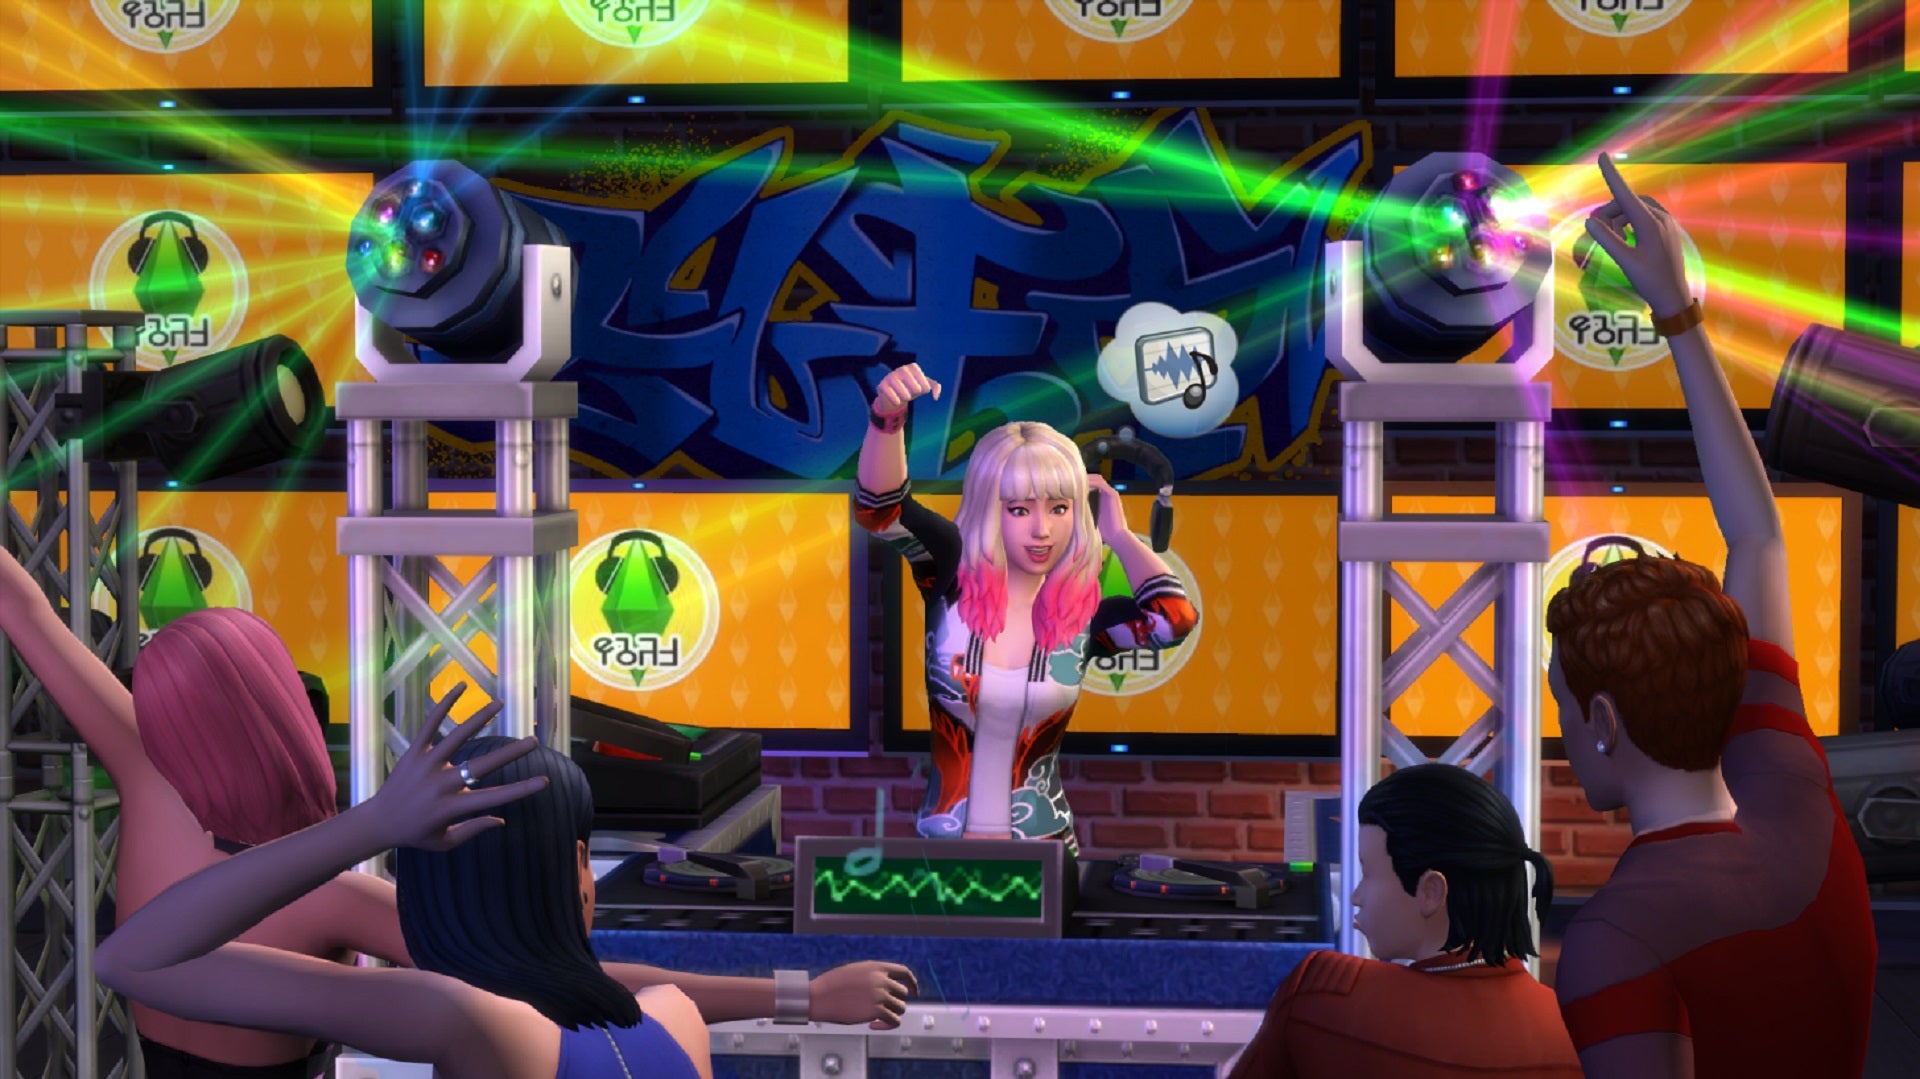 A DJ playing to a crowd in The Sims 4.